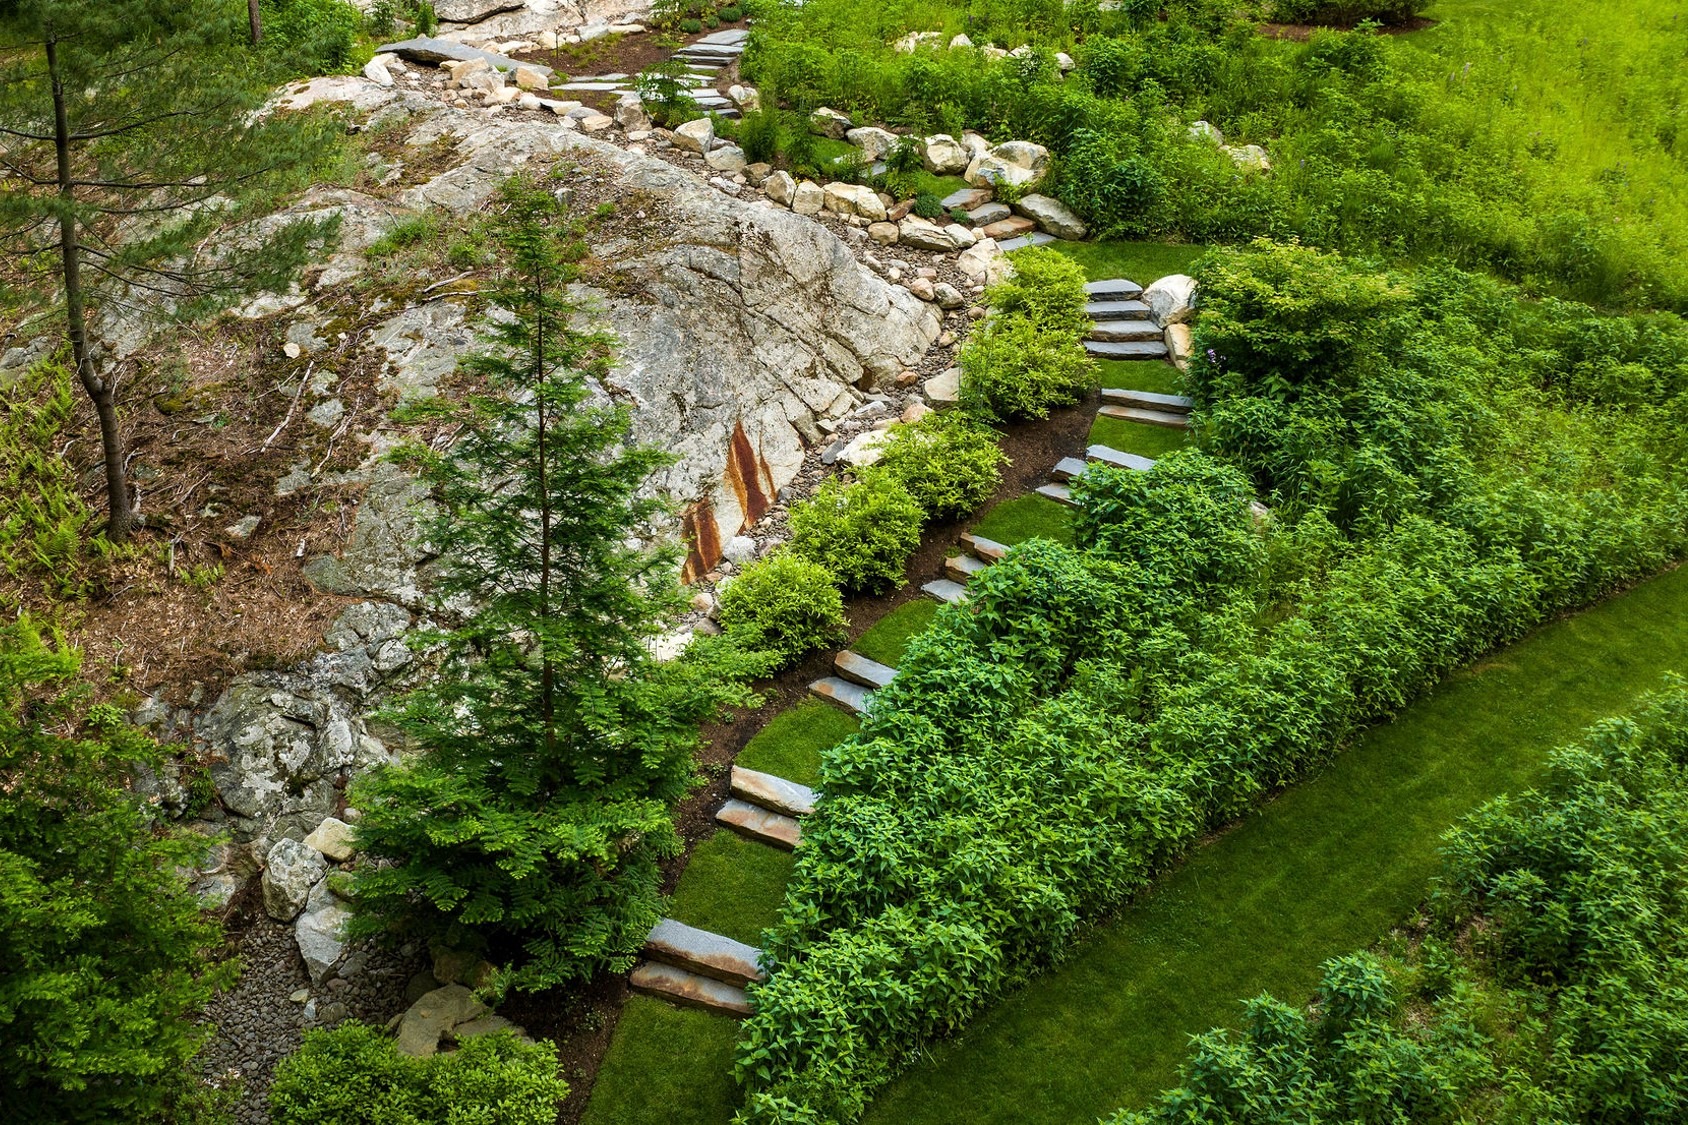 This image displays a lush garden with stepping stones, manicured hedges, and a rocky outcrop surrounded by vibrant greenery from an aerial perspective.